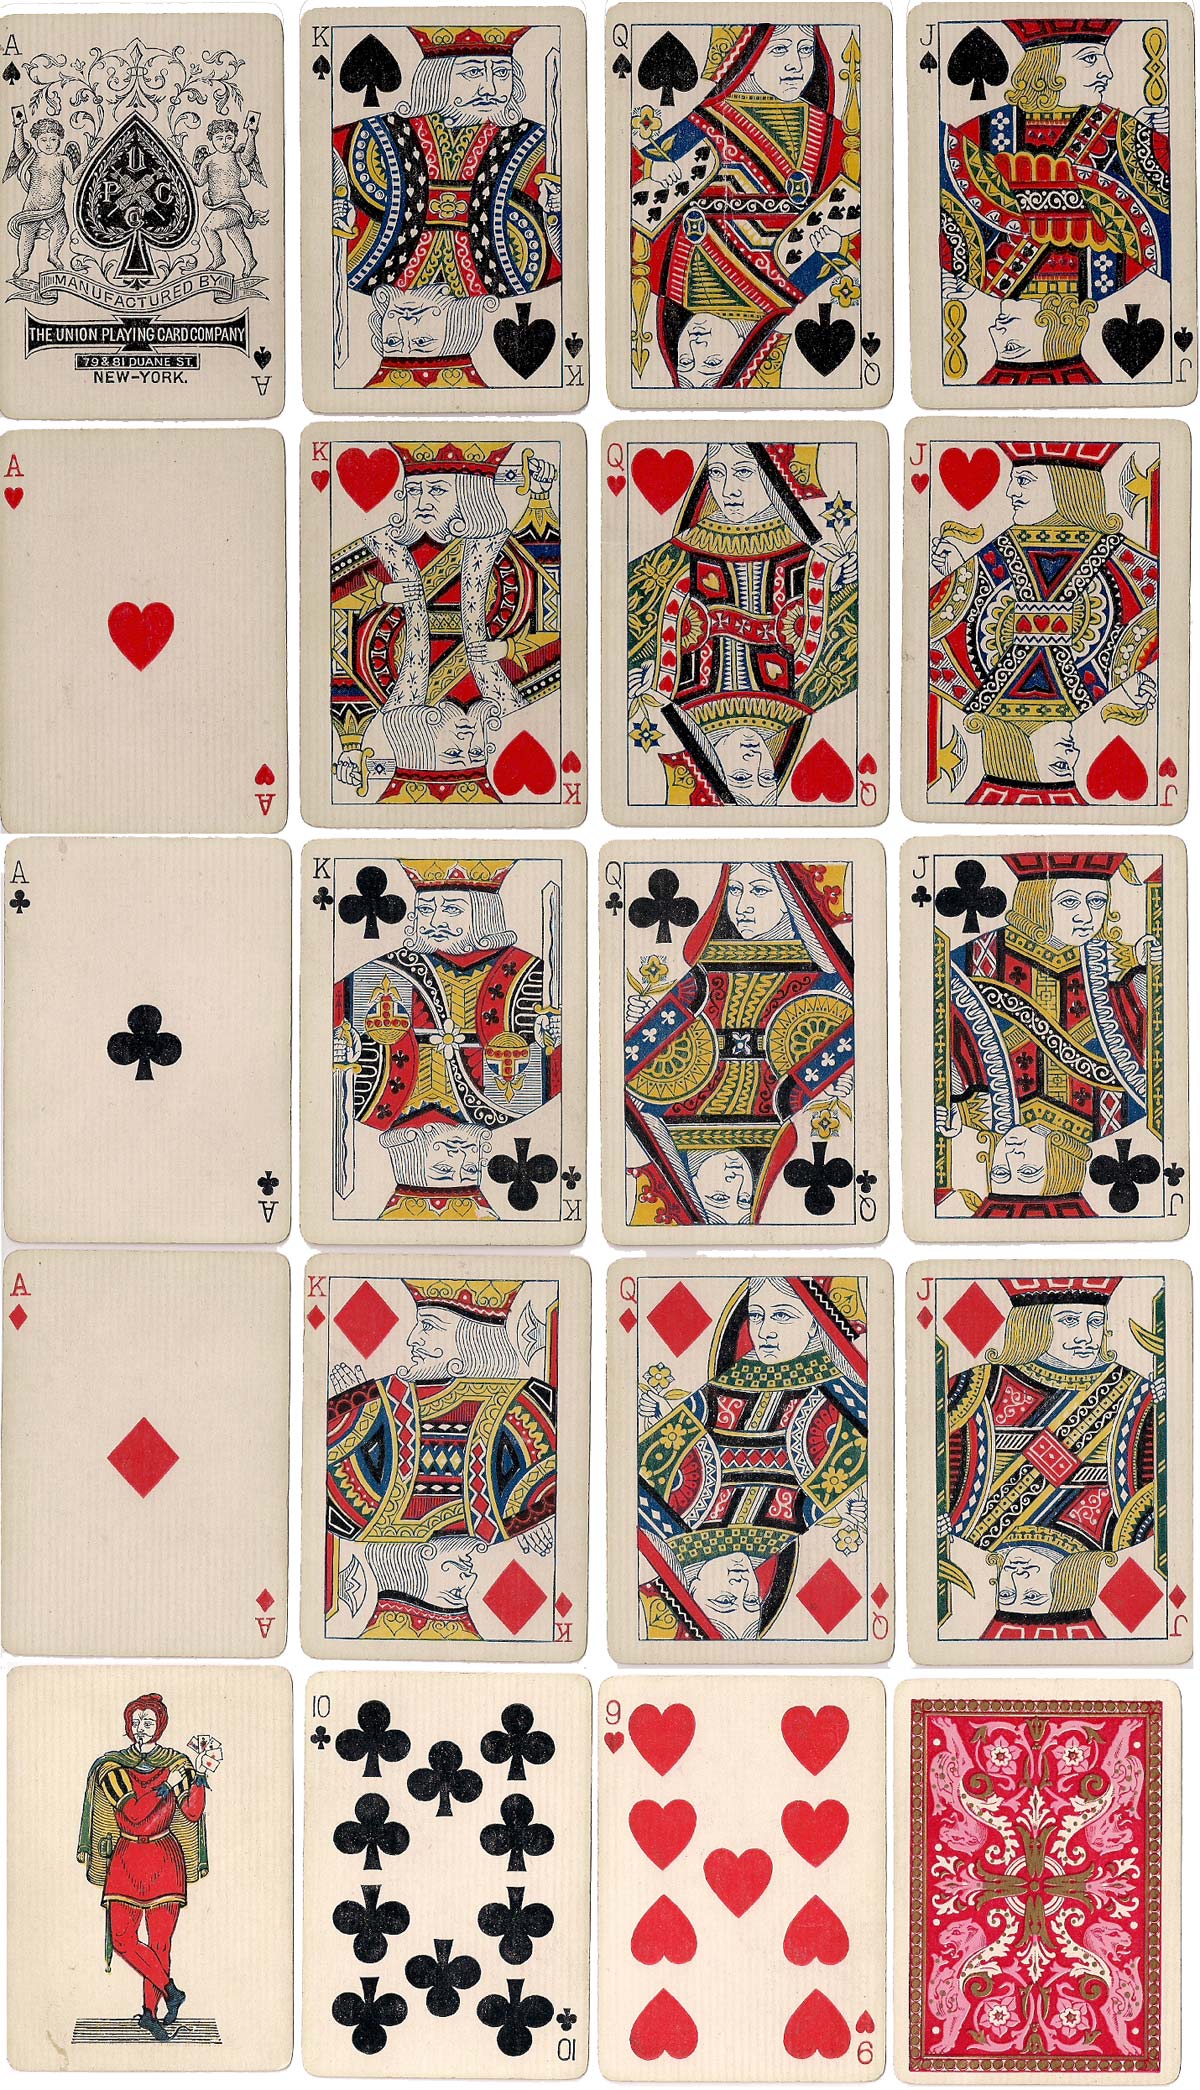 The “Traveler’s Companion”, Union Playing Card Co., New York, c.1886